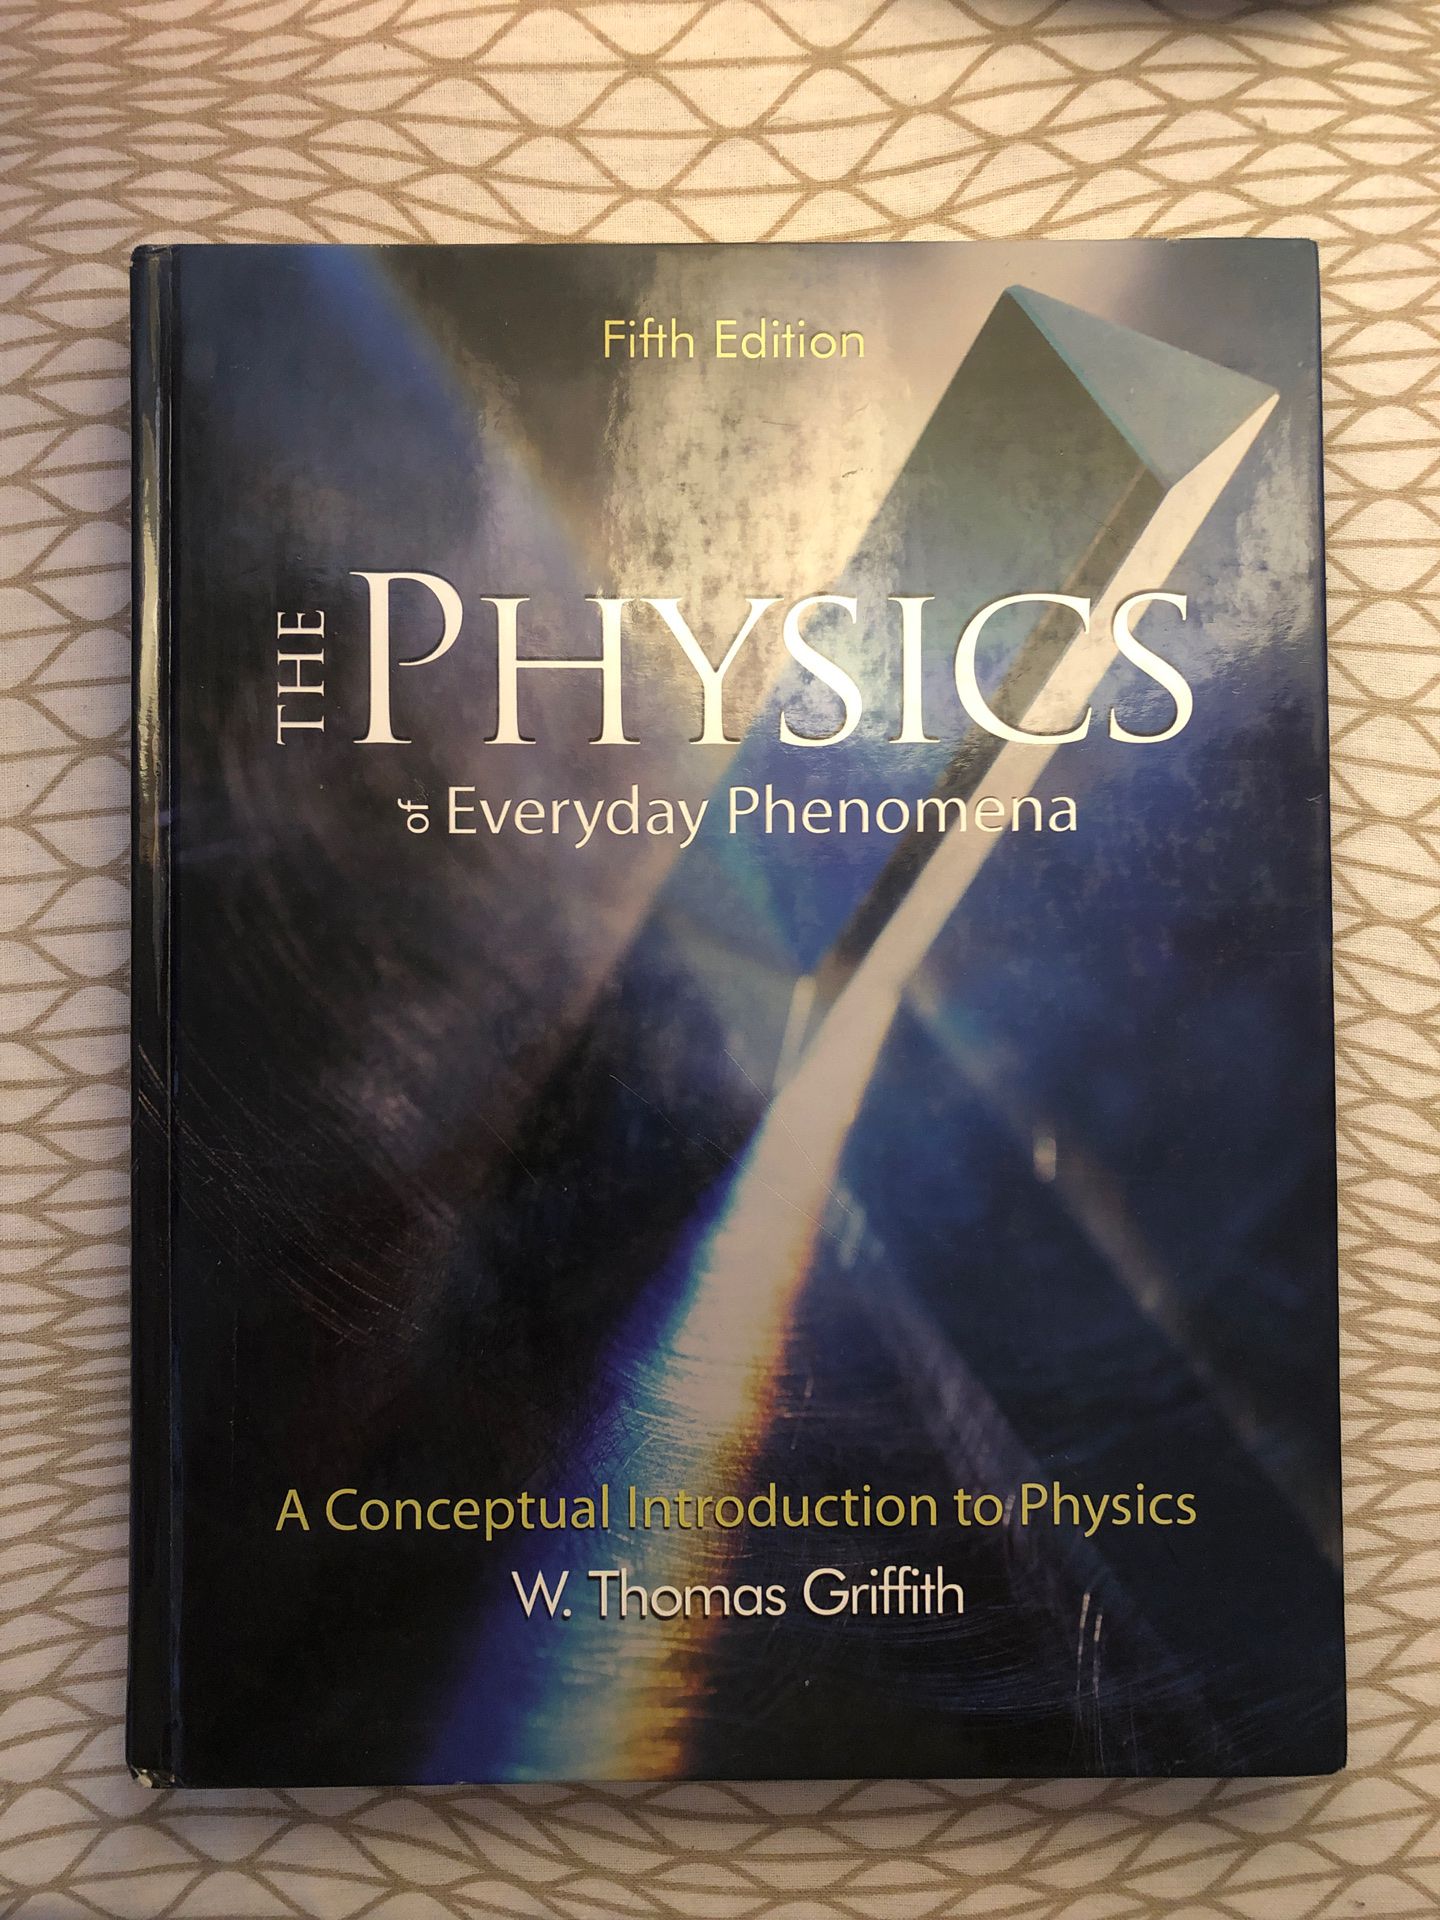 The Physics of Everyday Phenomena by W Thomas Griffith (Fifth Edition)